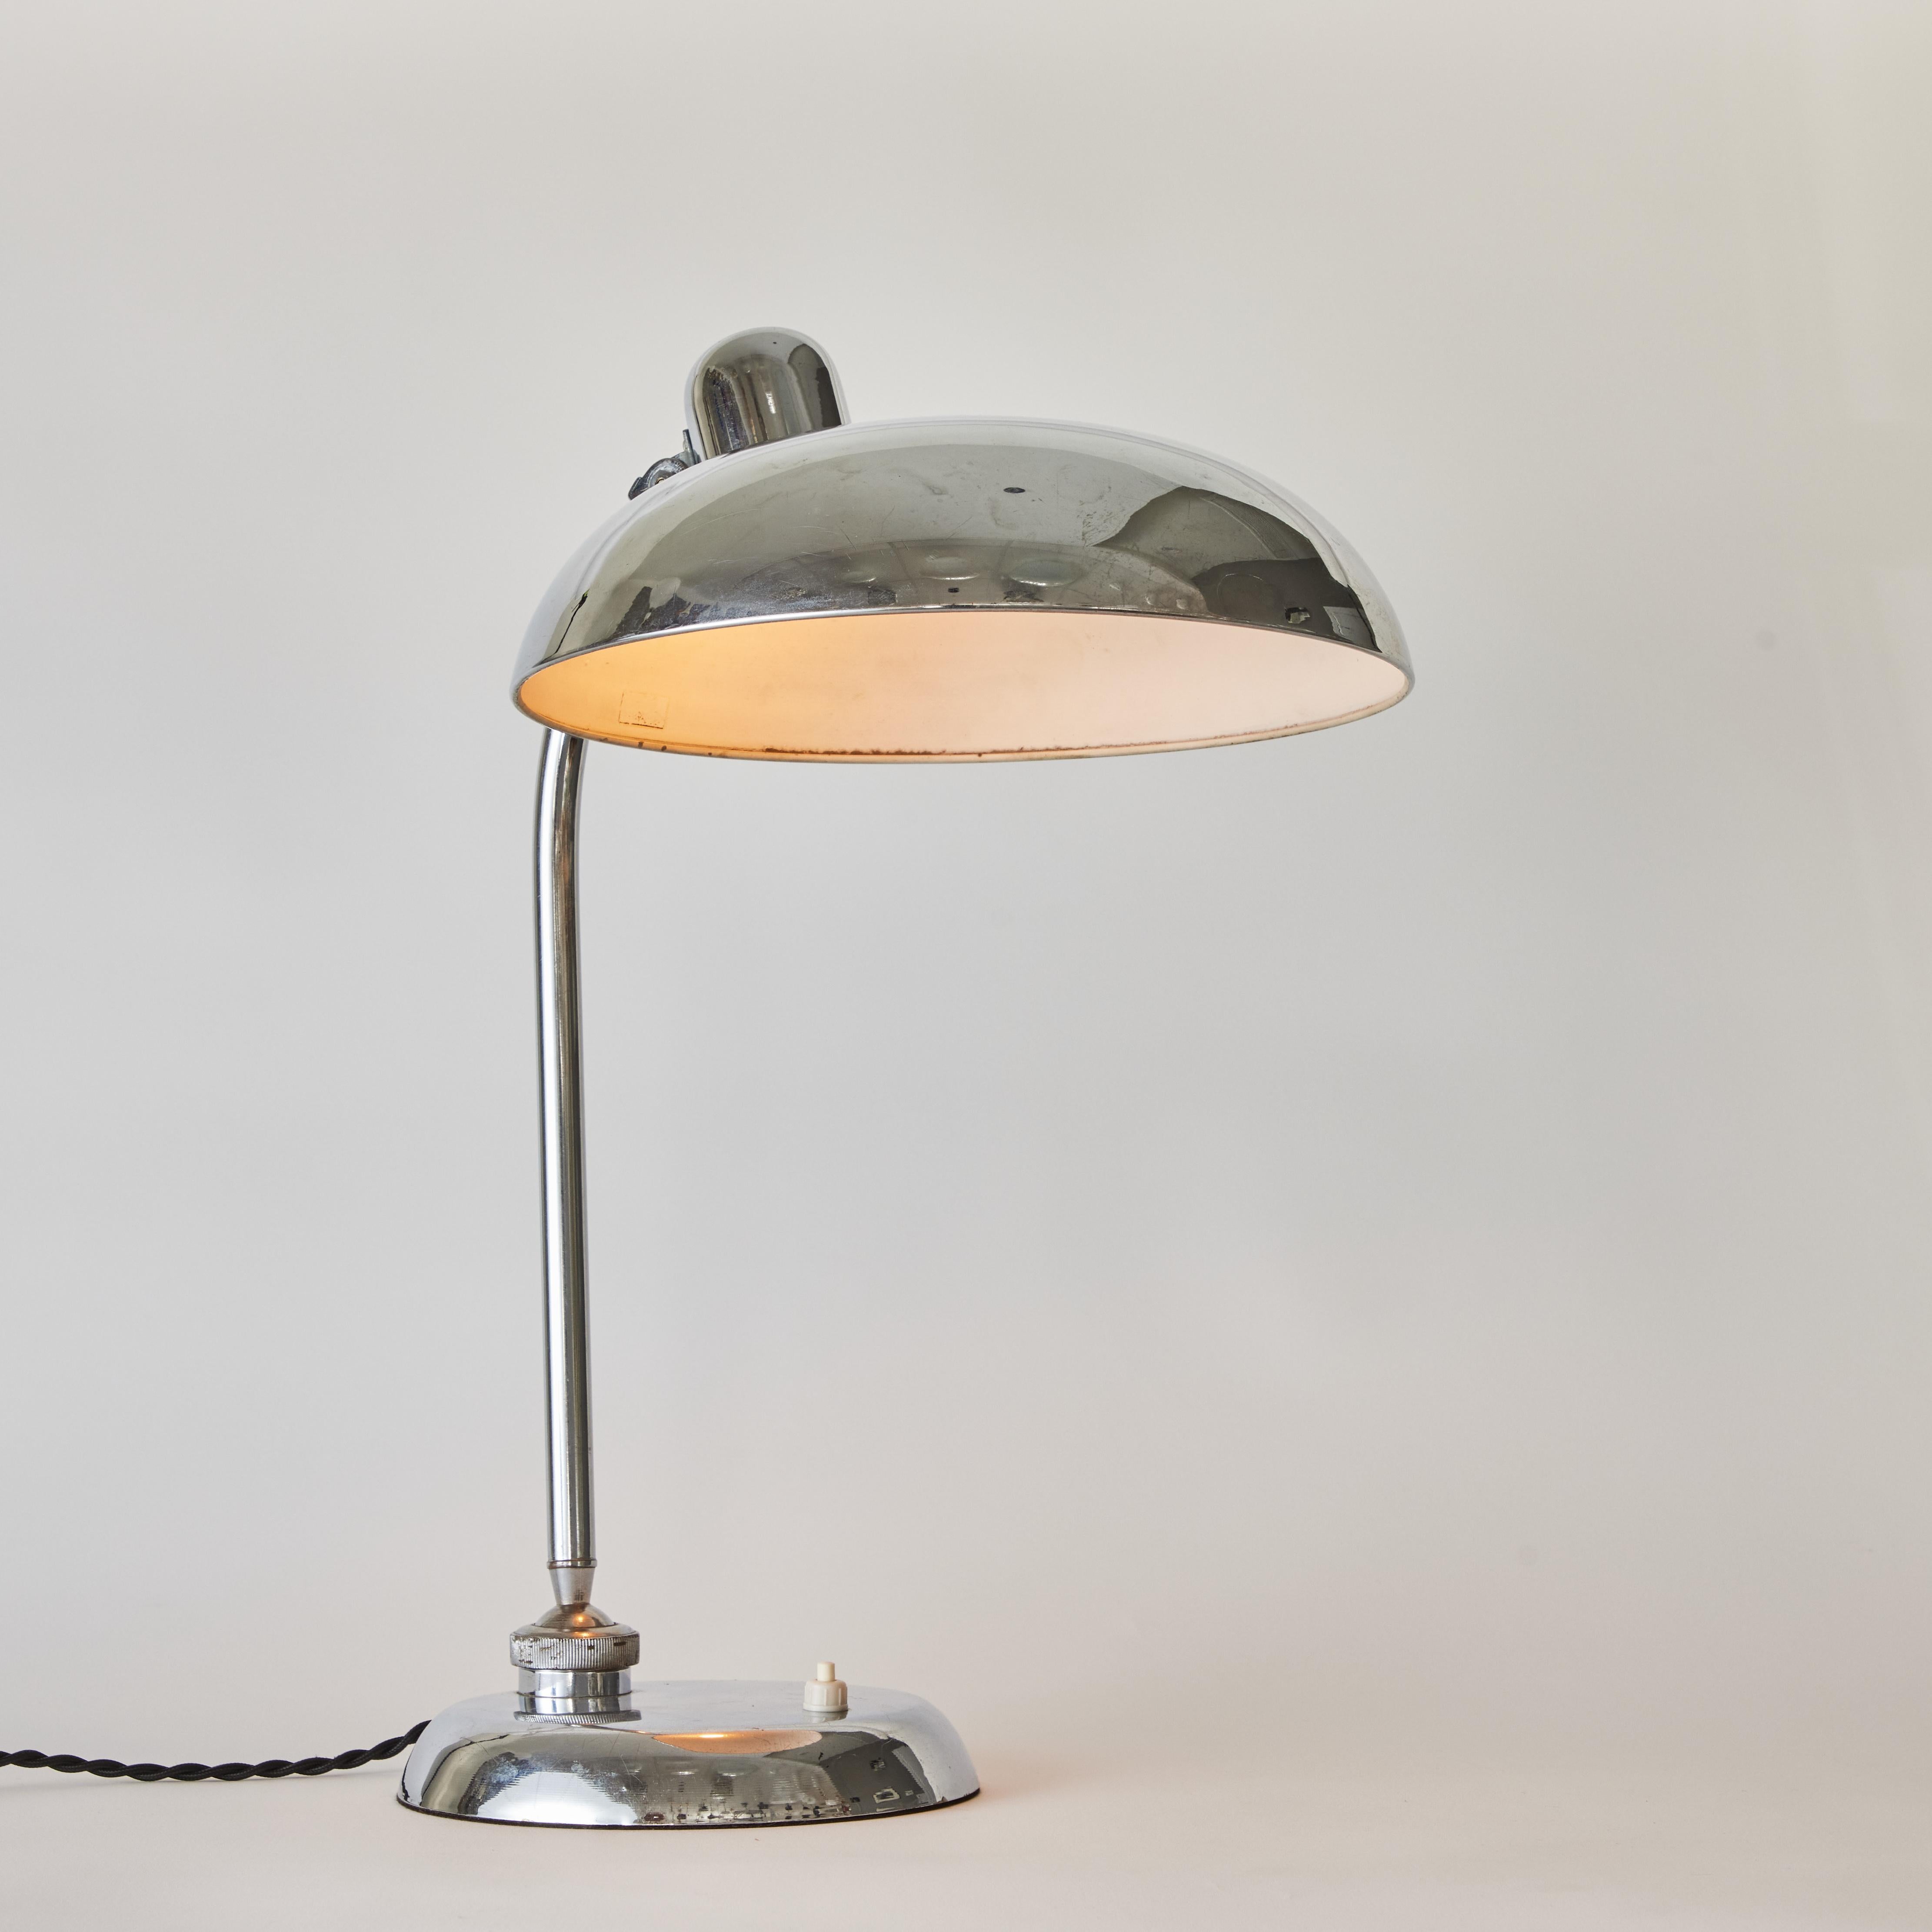 Large 1940s Giovanni Michelucci Chrome Ministerial Table Lamp for Lariolux For Sale 8